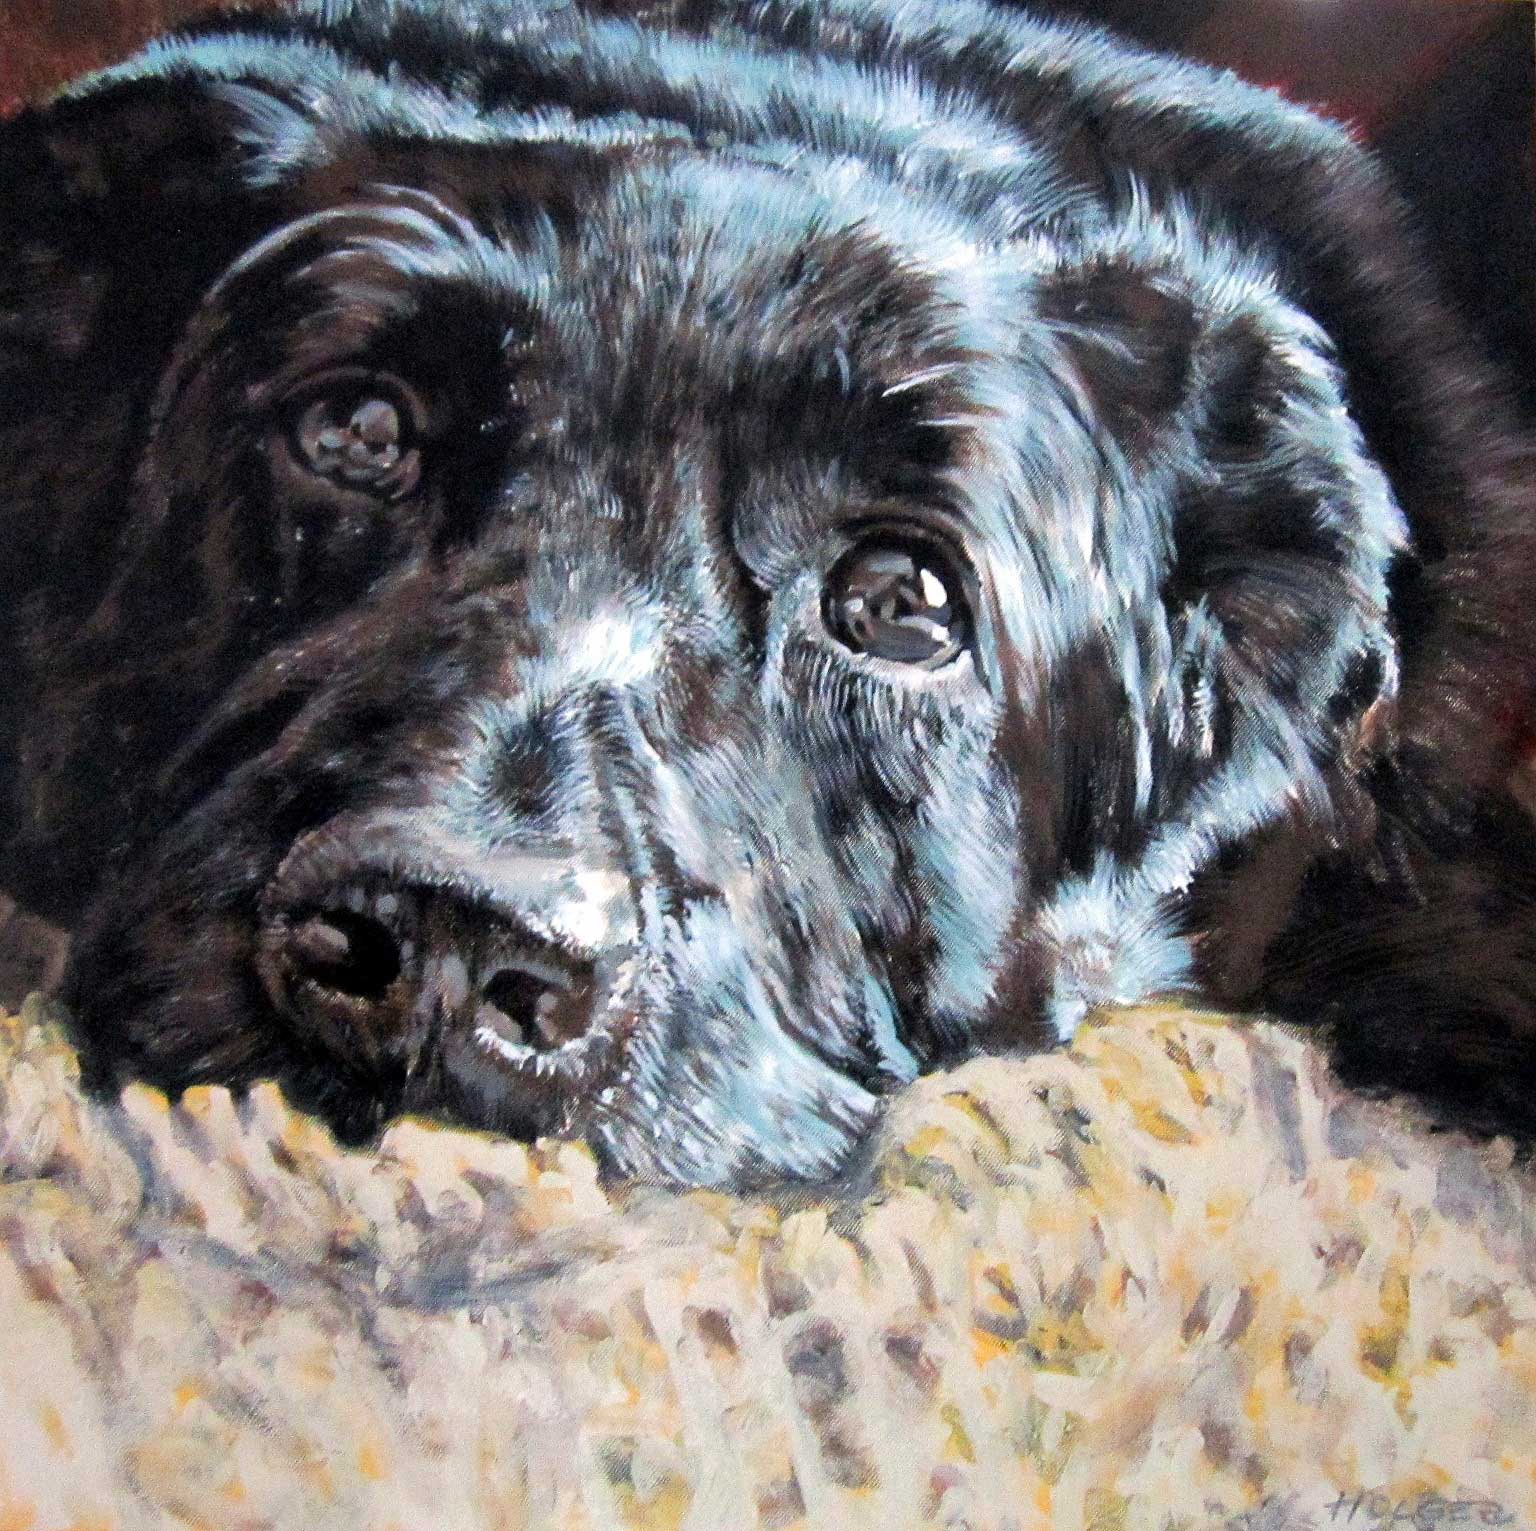 "Nelly", 24x24